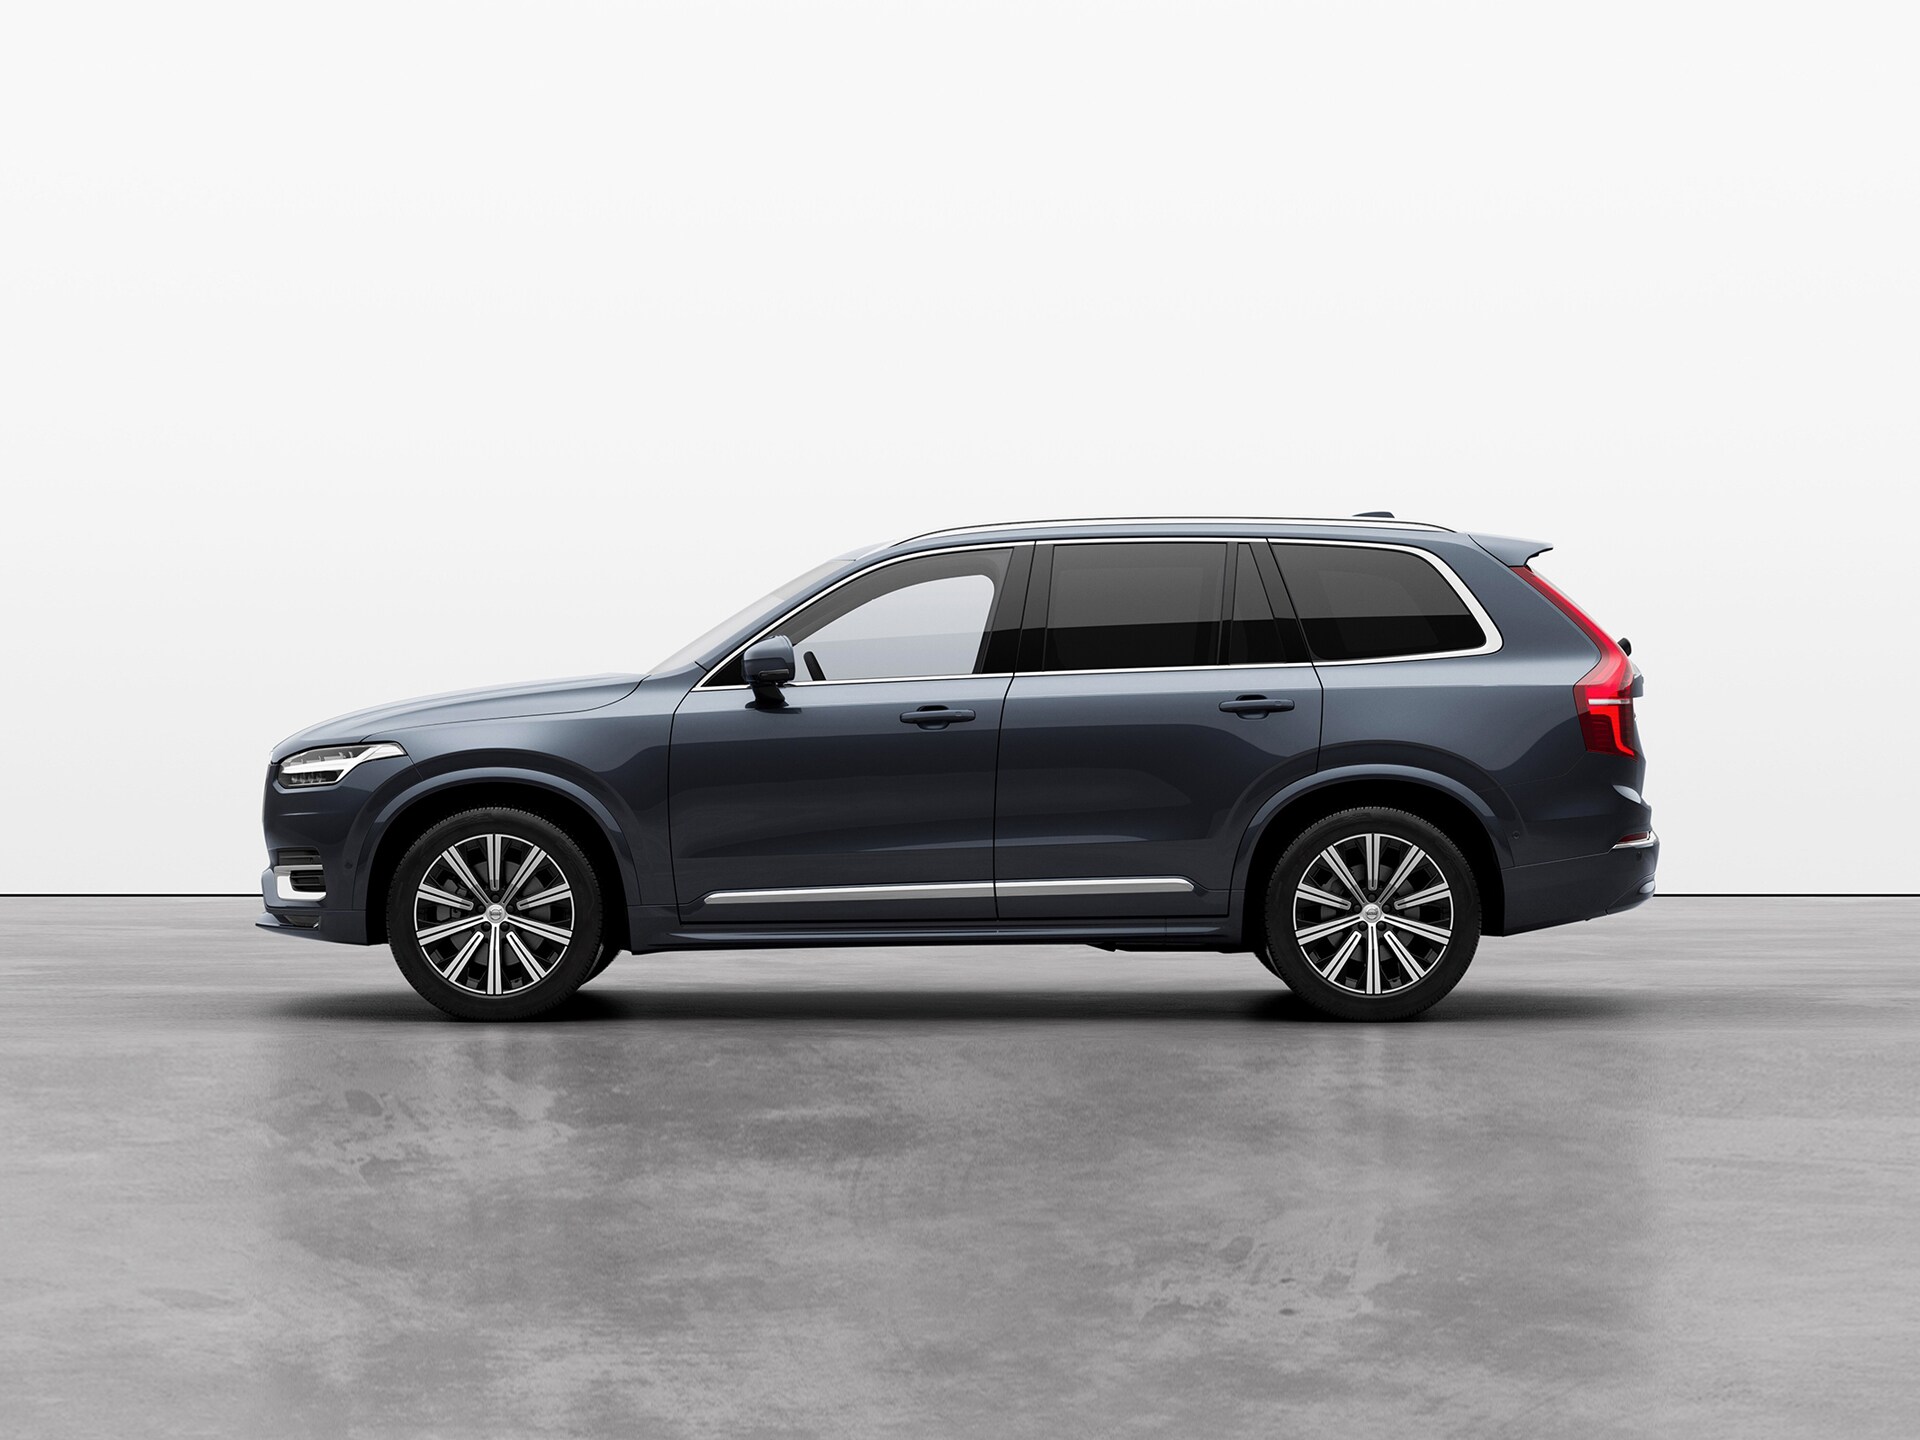 A silver Volvo XC90 compact SUV standing still on grey floor in a studio